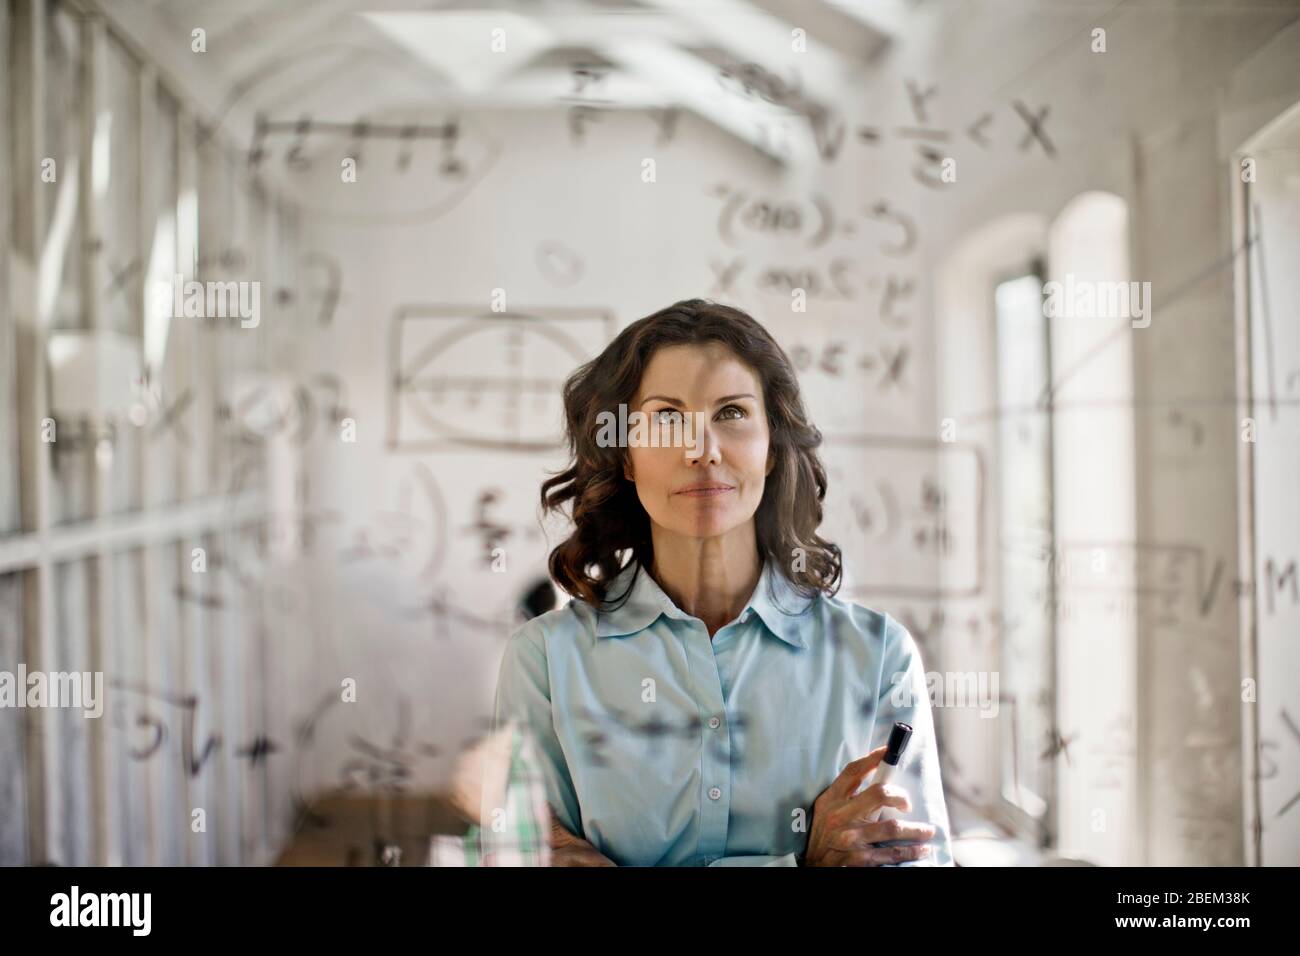 Mathematician working to solve an equation Stock Photo